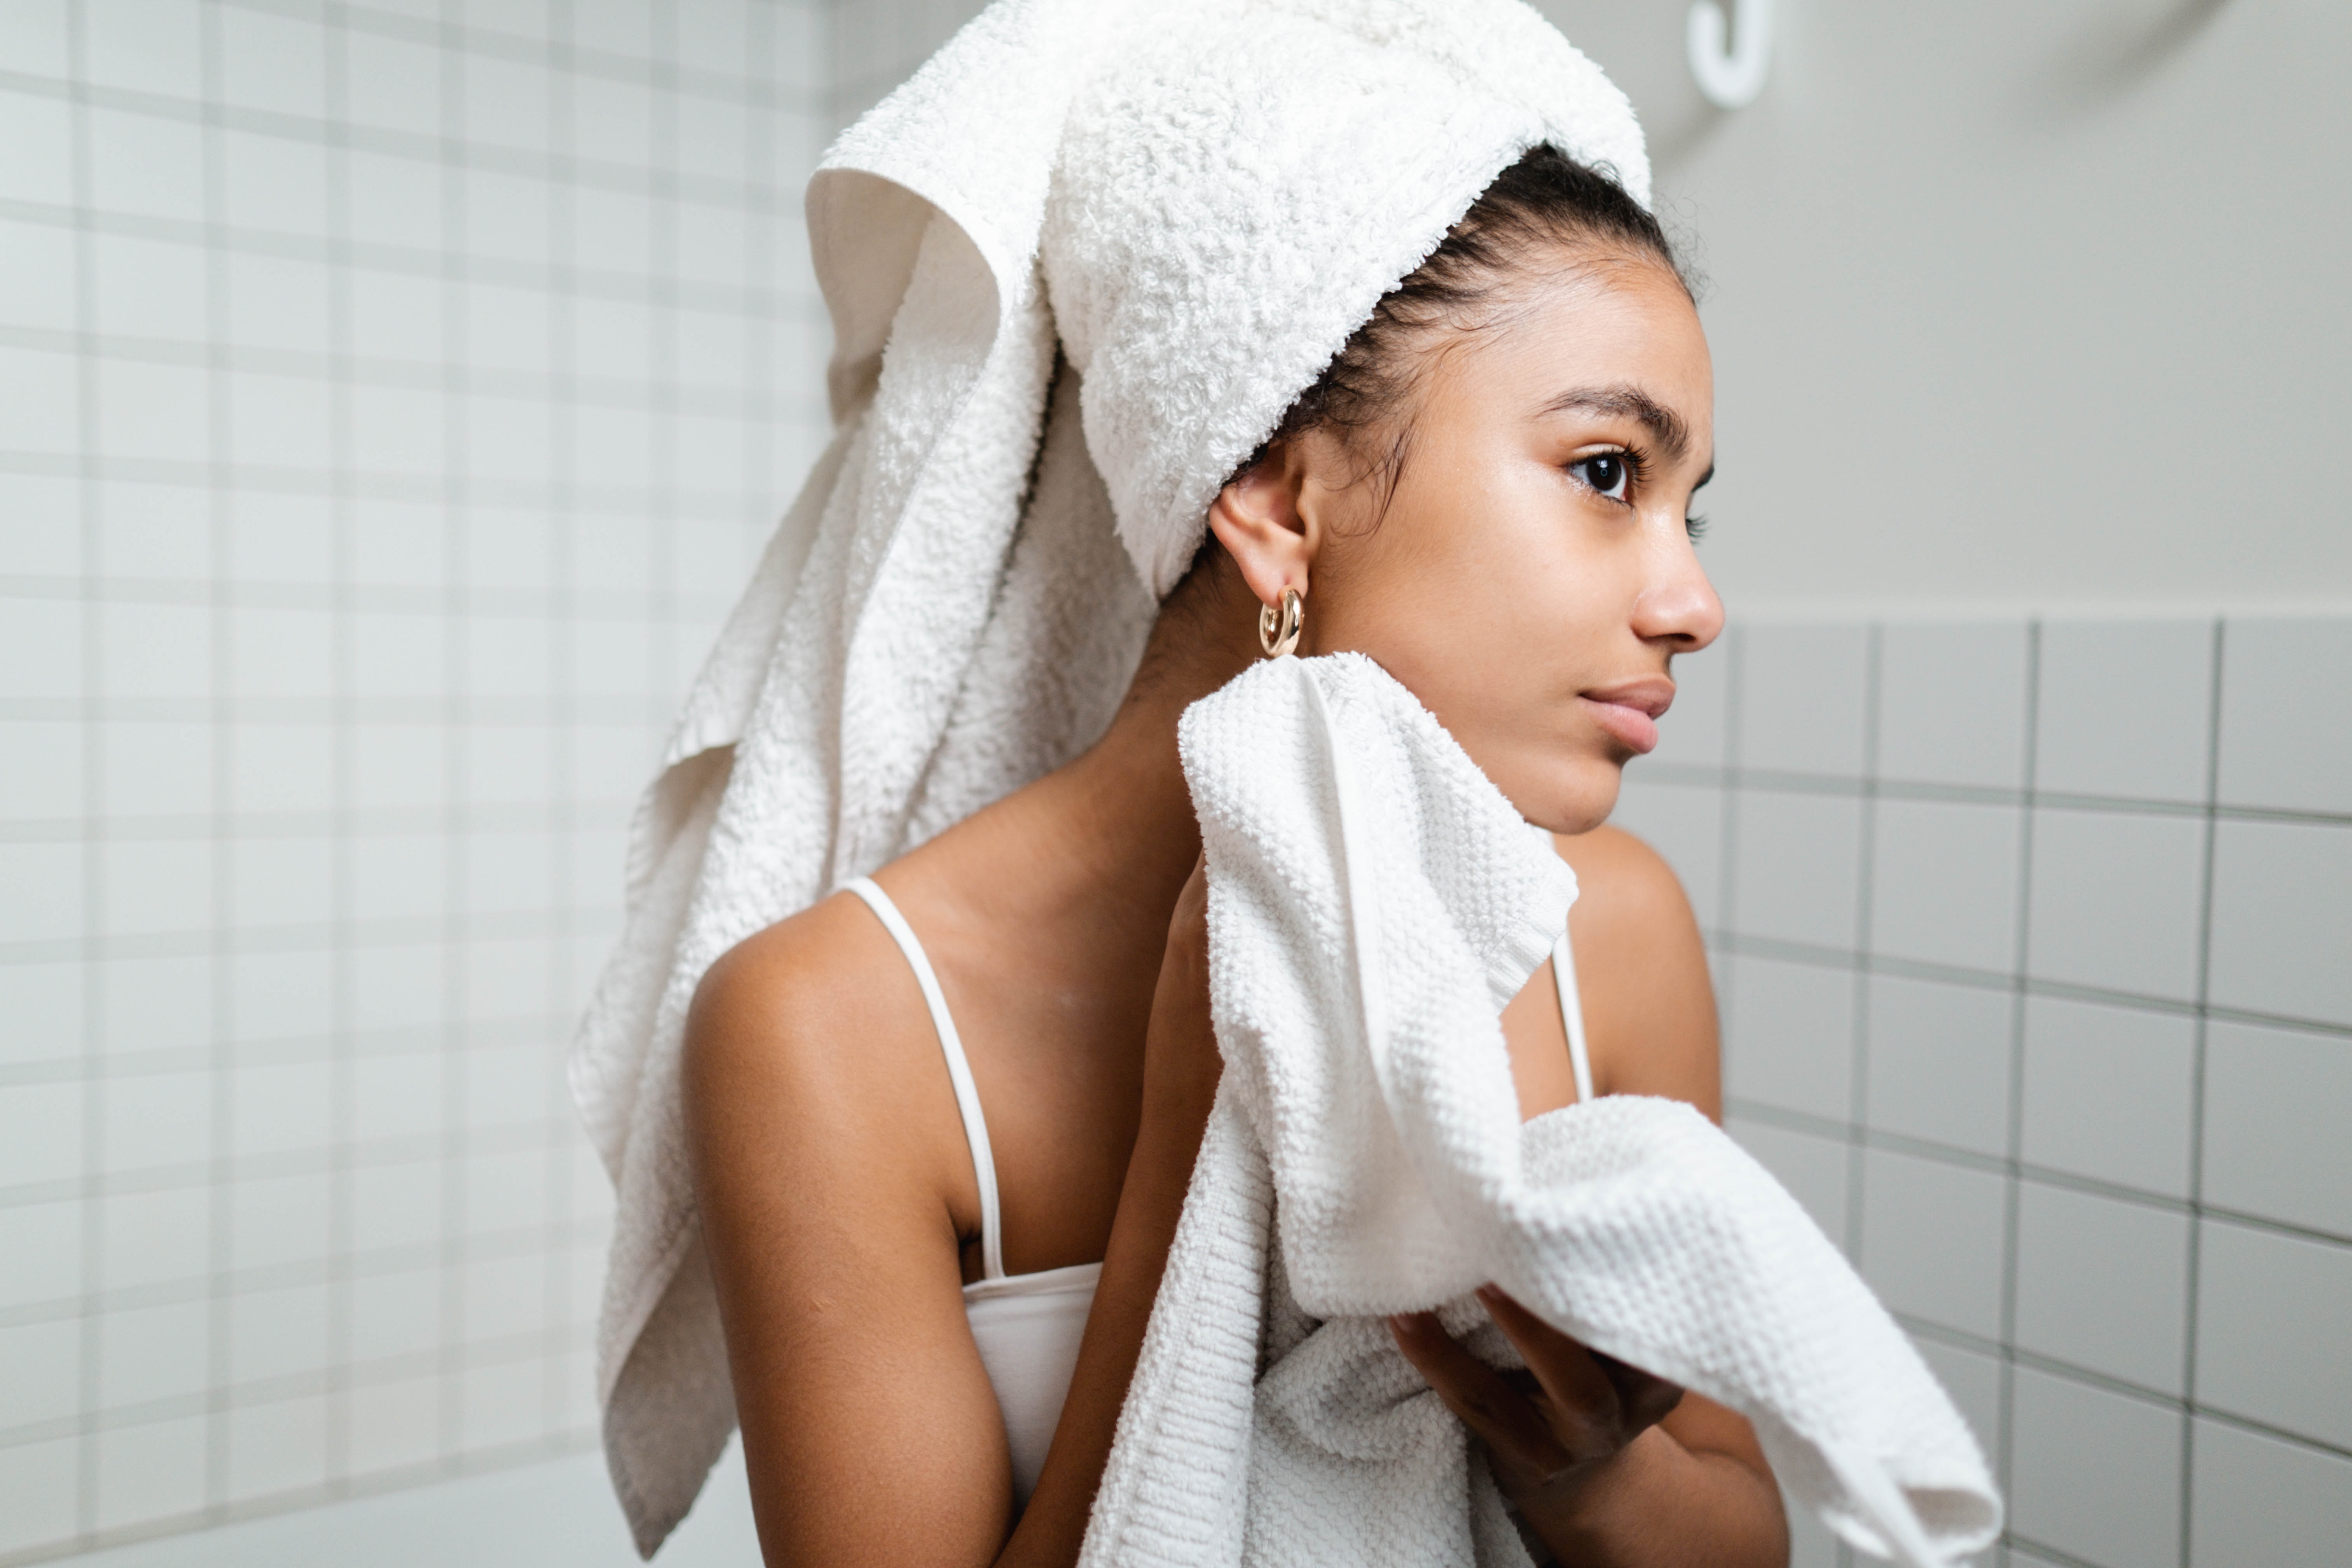 Woman with brown eyes staring into reflection with towel on head and body